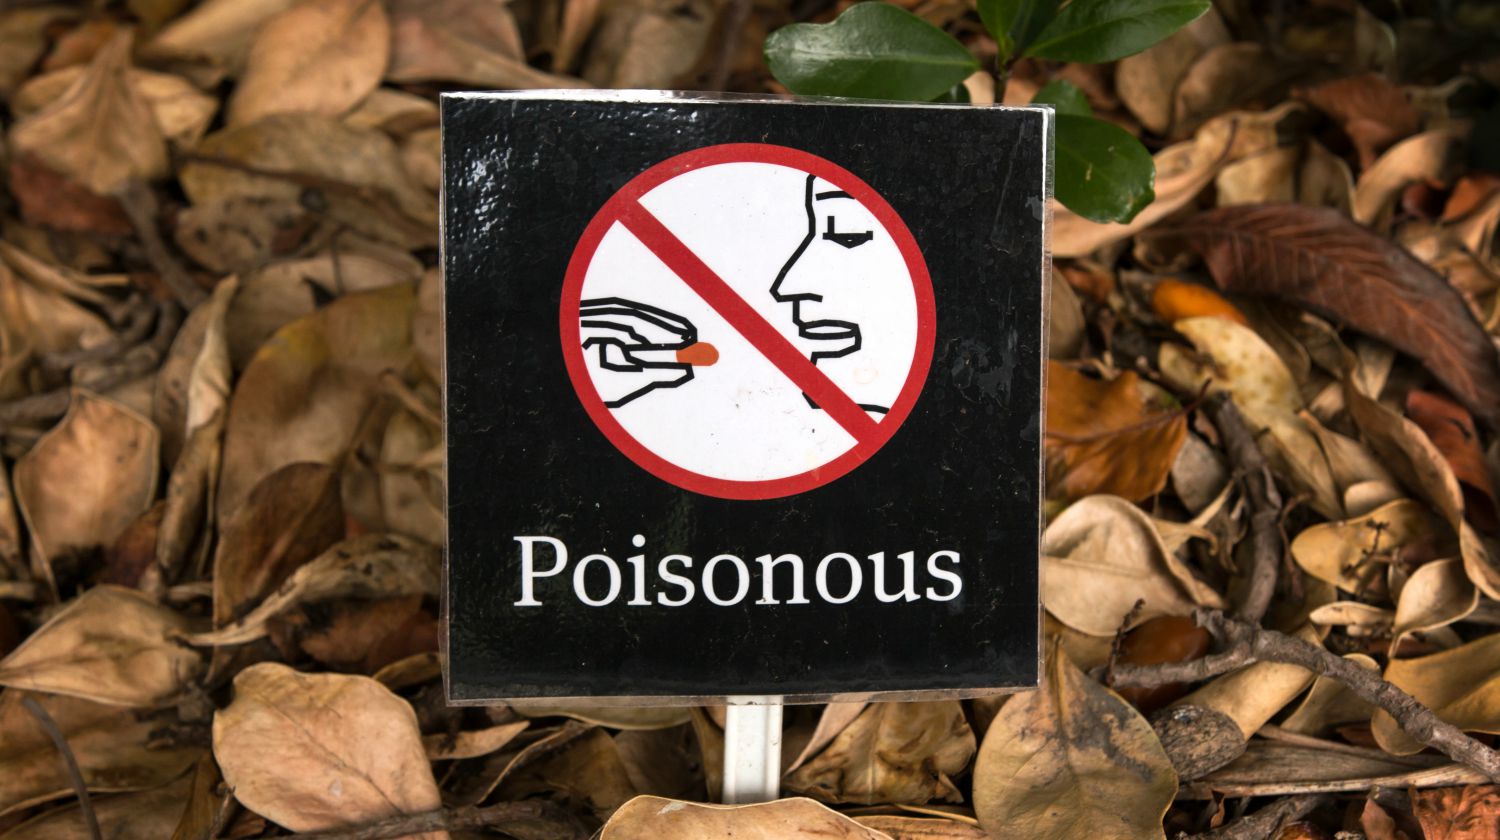 Poisonous sign under a tree | Wilderness Survival Skills: A Guide To Identifying Poisonous Plants | Featured